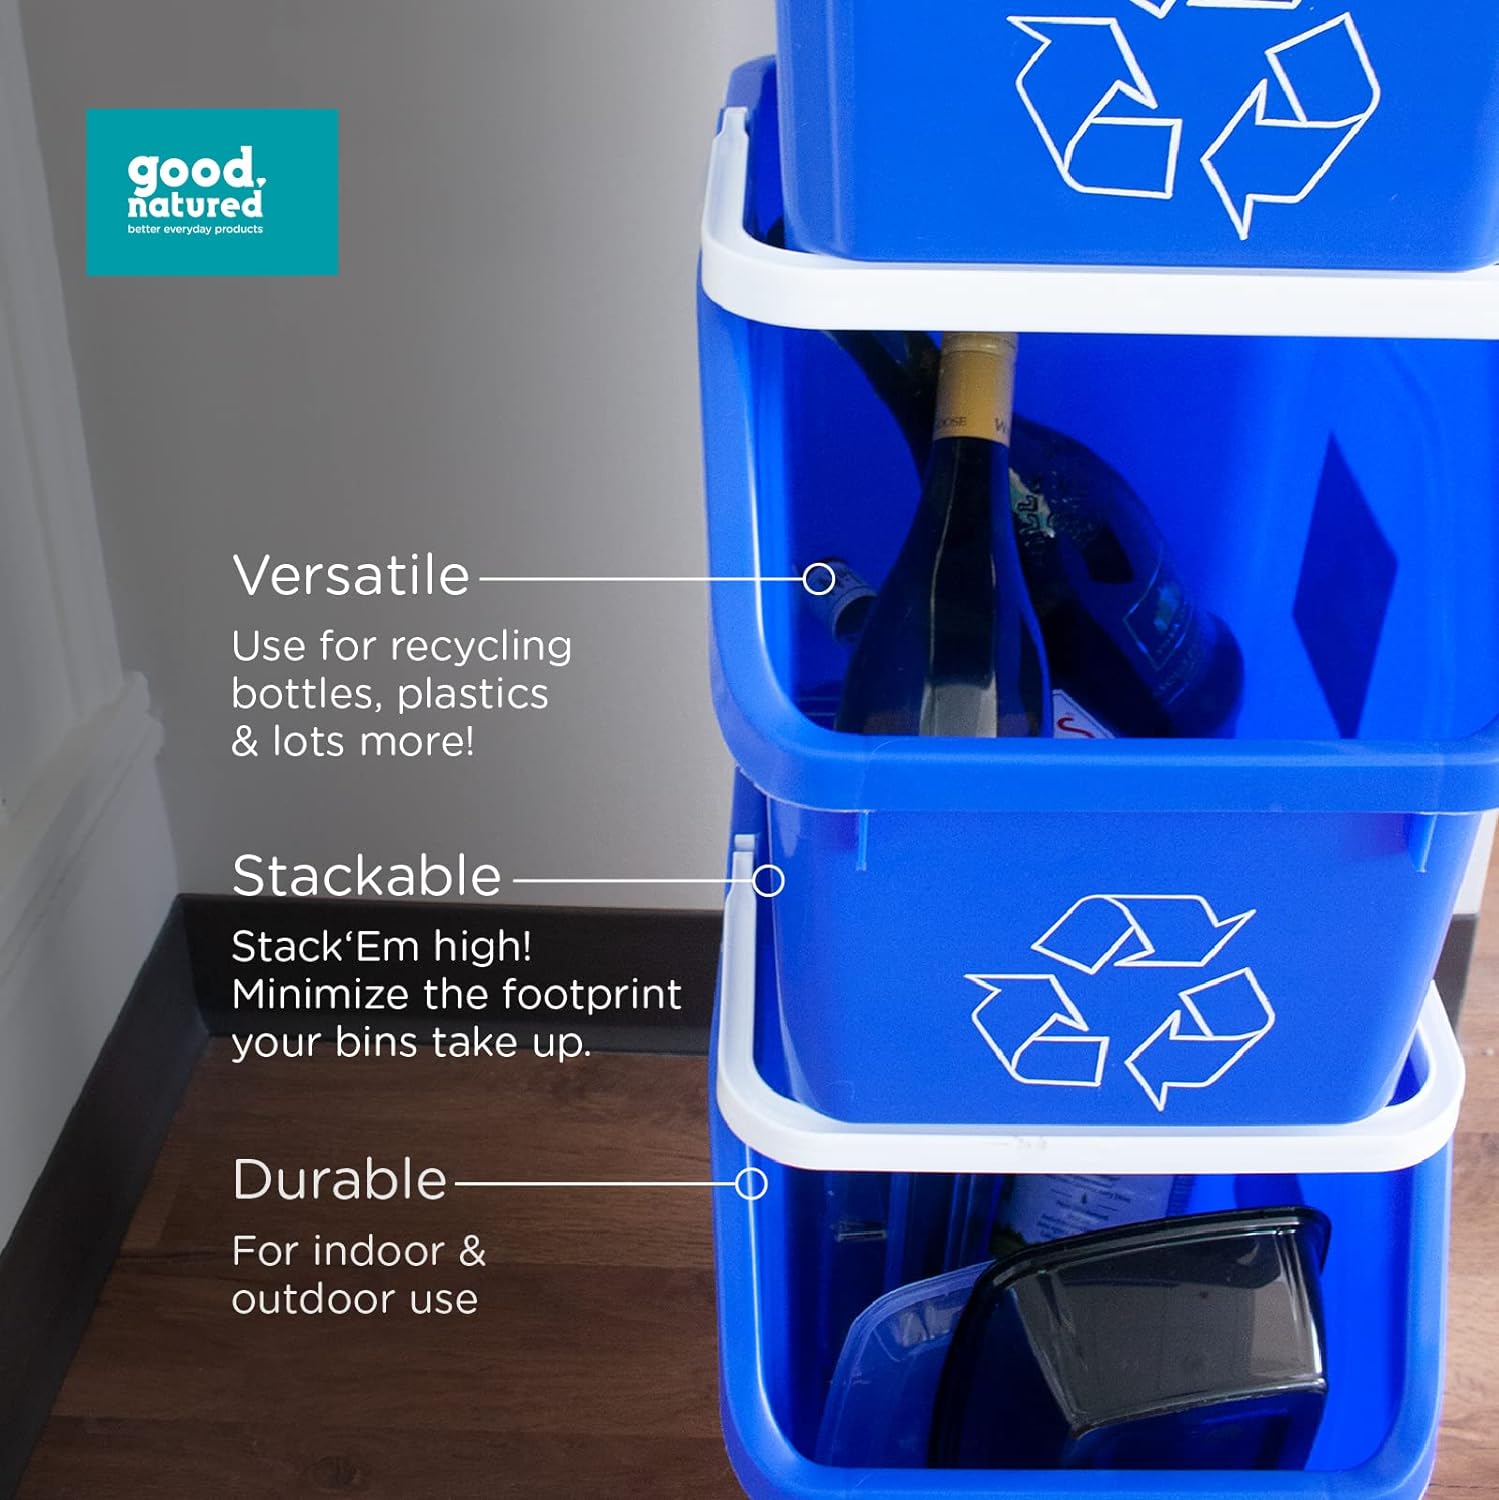 Good Natured Stackable Recycle Bin with Handle Review